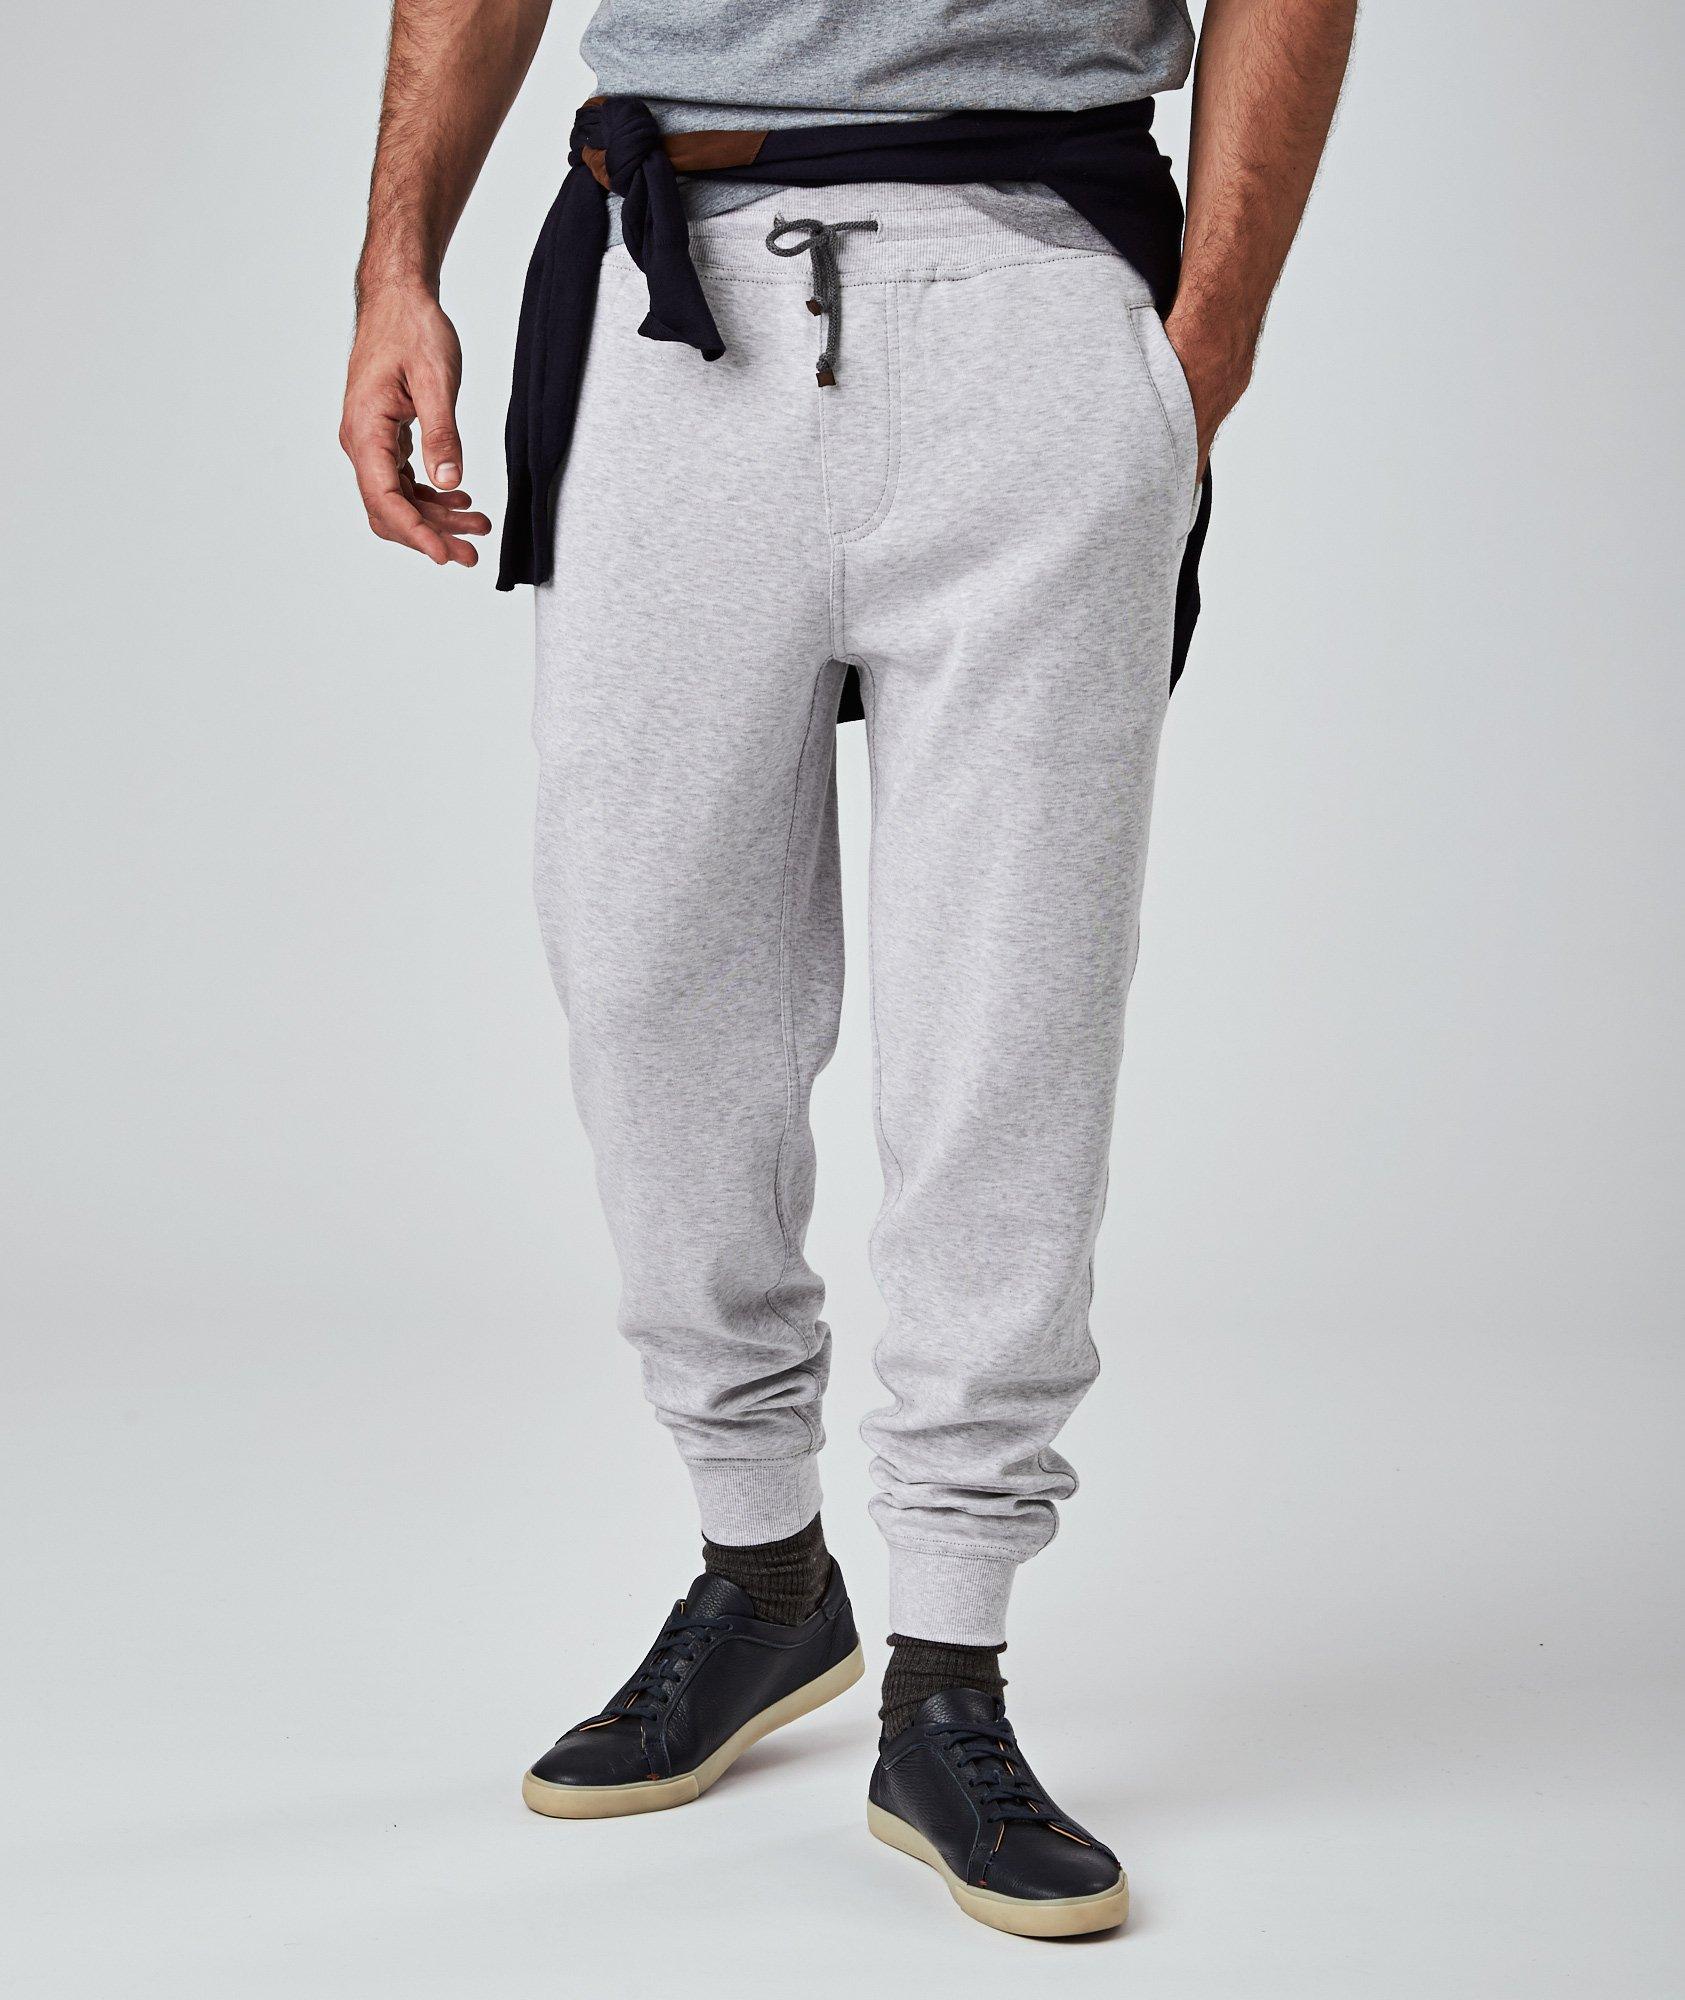 Contemporary Fit Drawstring Joggers image 0